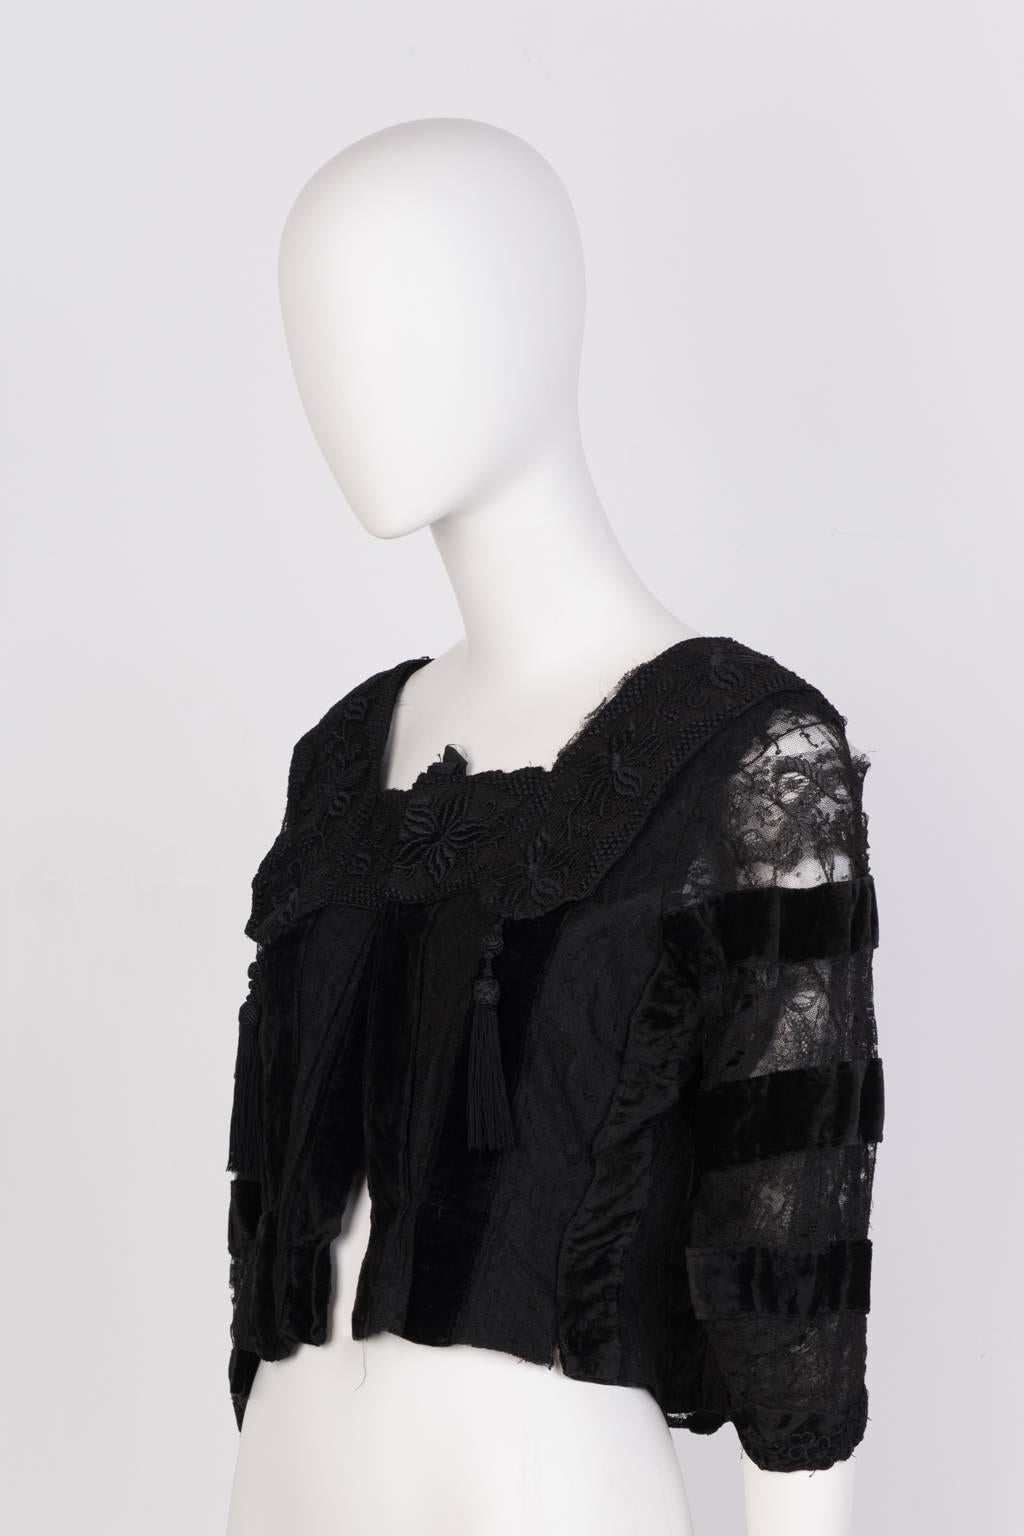 Black lace and velvet Victorian blouse with tassle detail and snap closures.